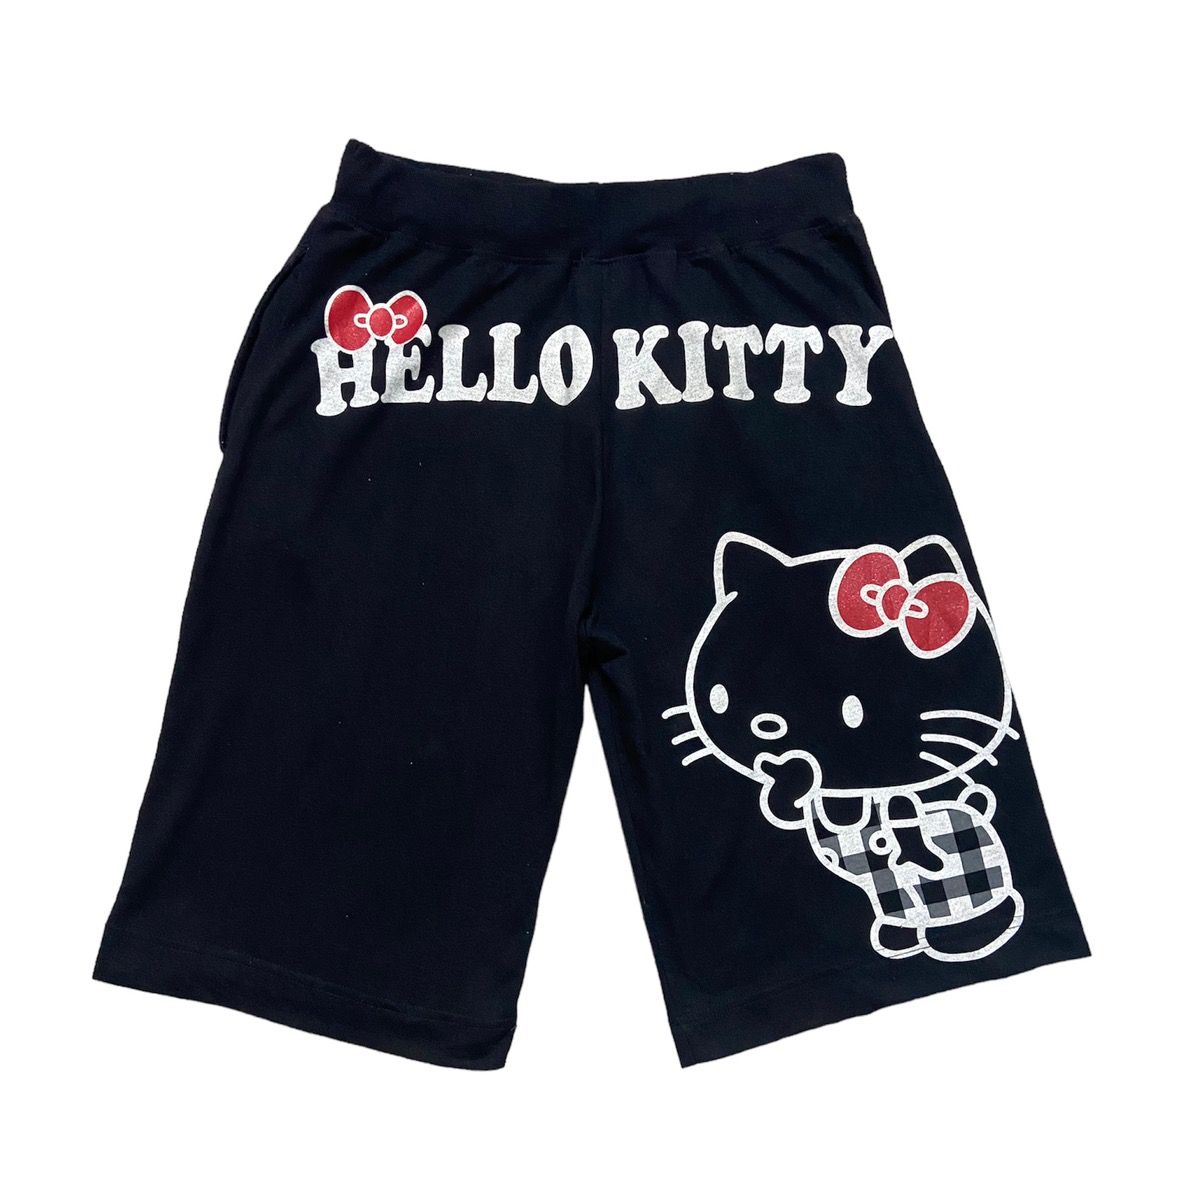 Japanese Brand - Hello Kitty For Sale in Japan Only Shorts - 2